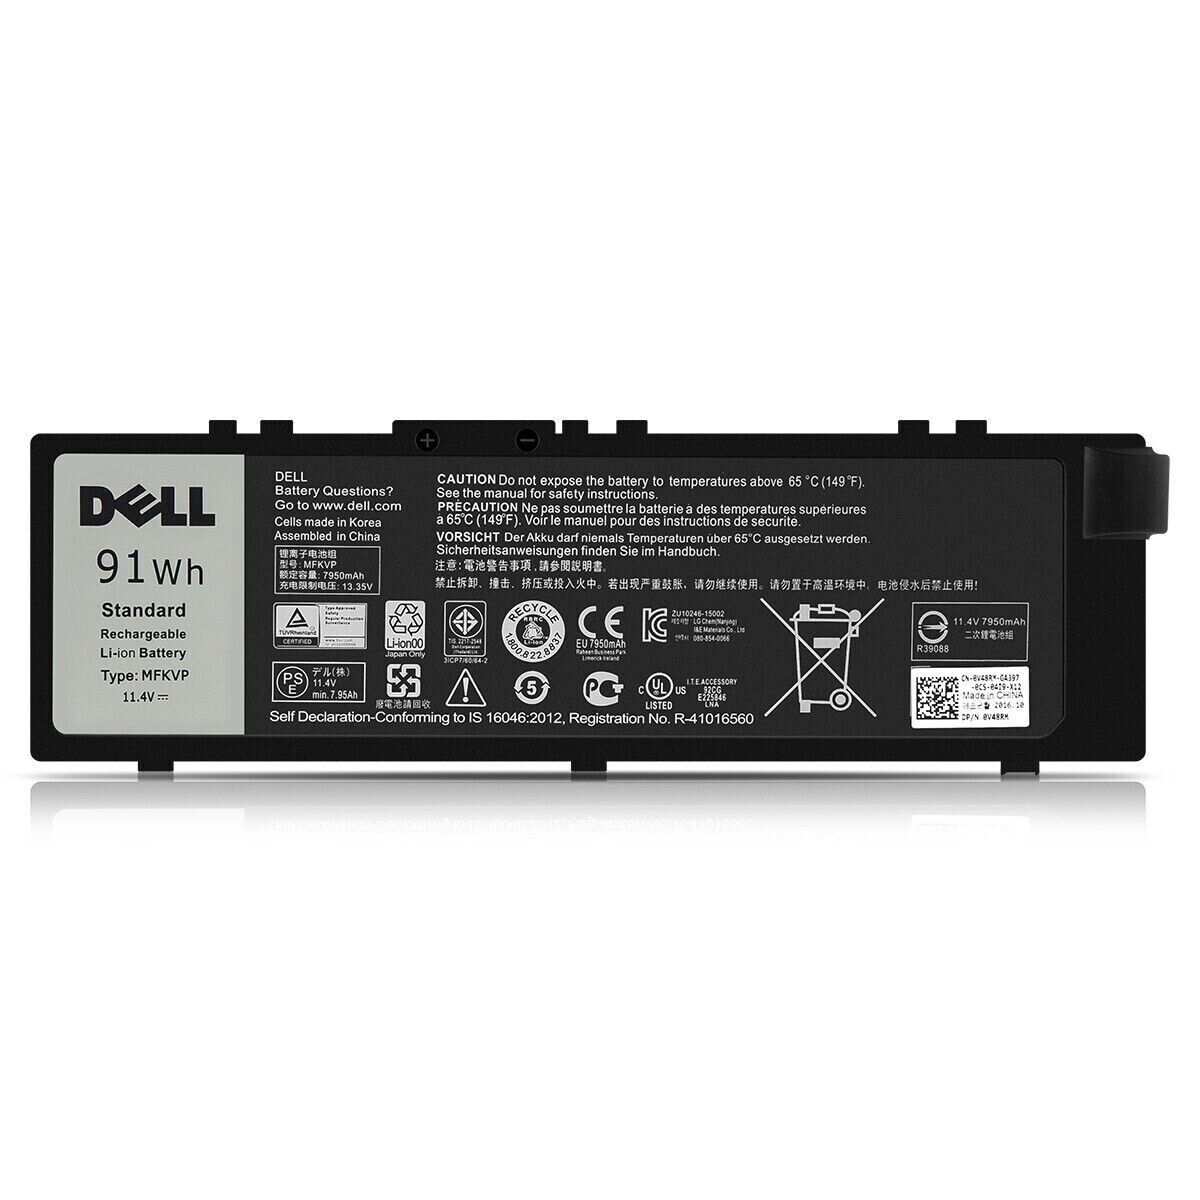 OEM 91Wh MFKVP Battery For Dell Precision 15 7510 7520 17 7710 7720 M7510 M7710